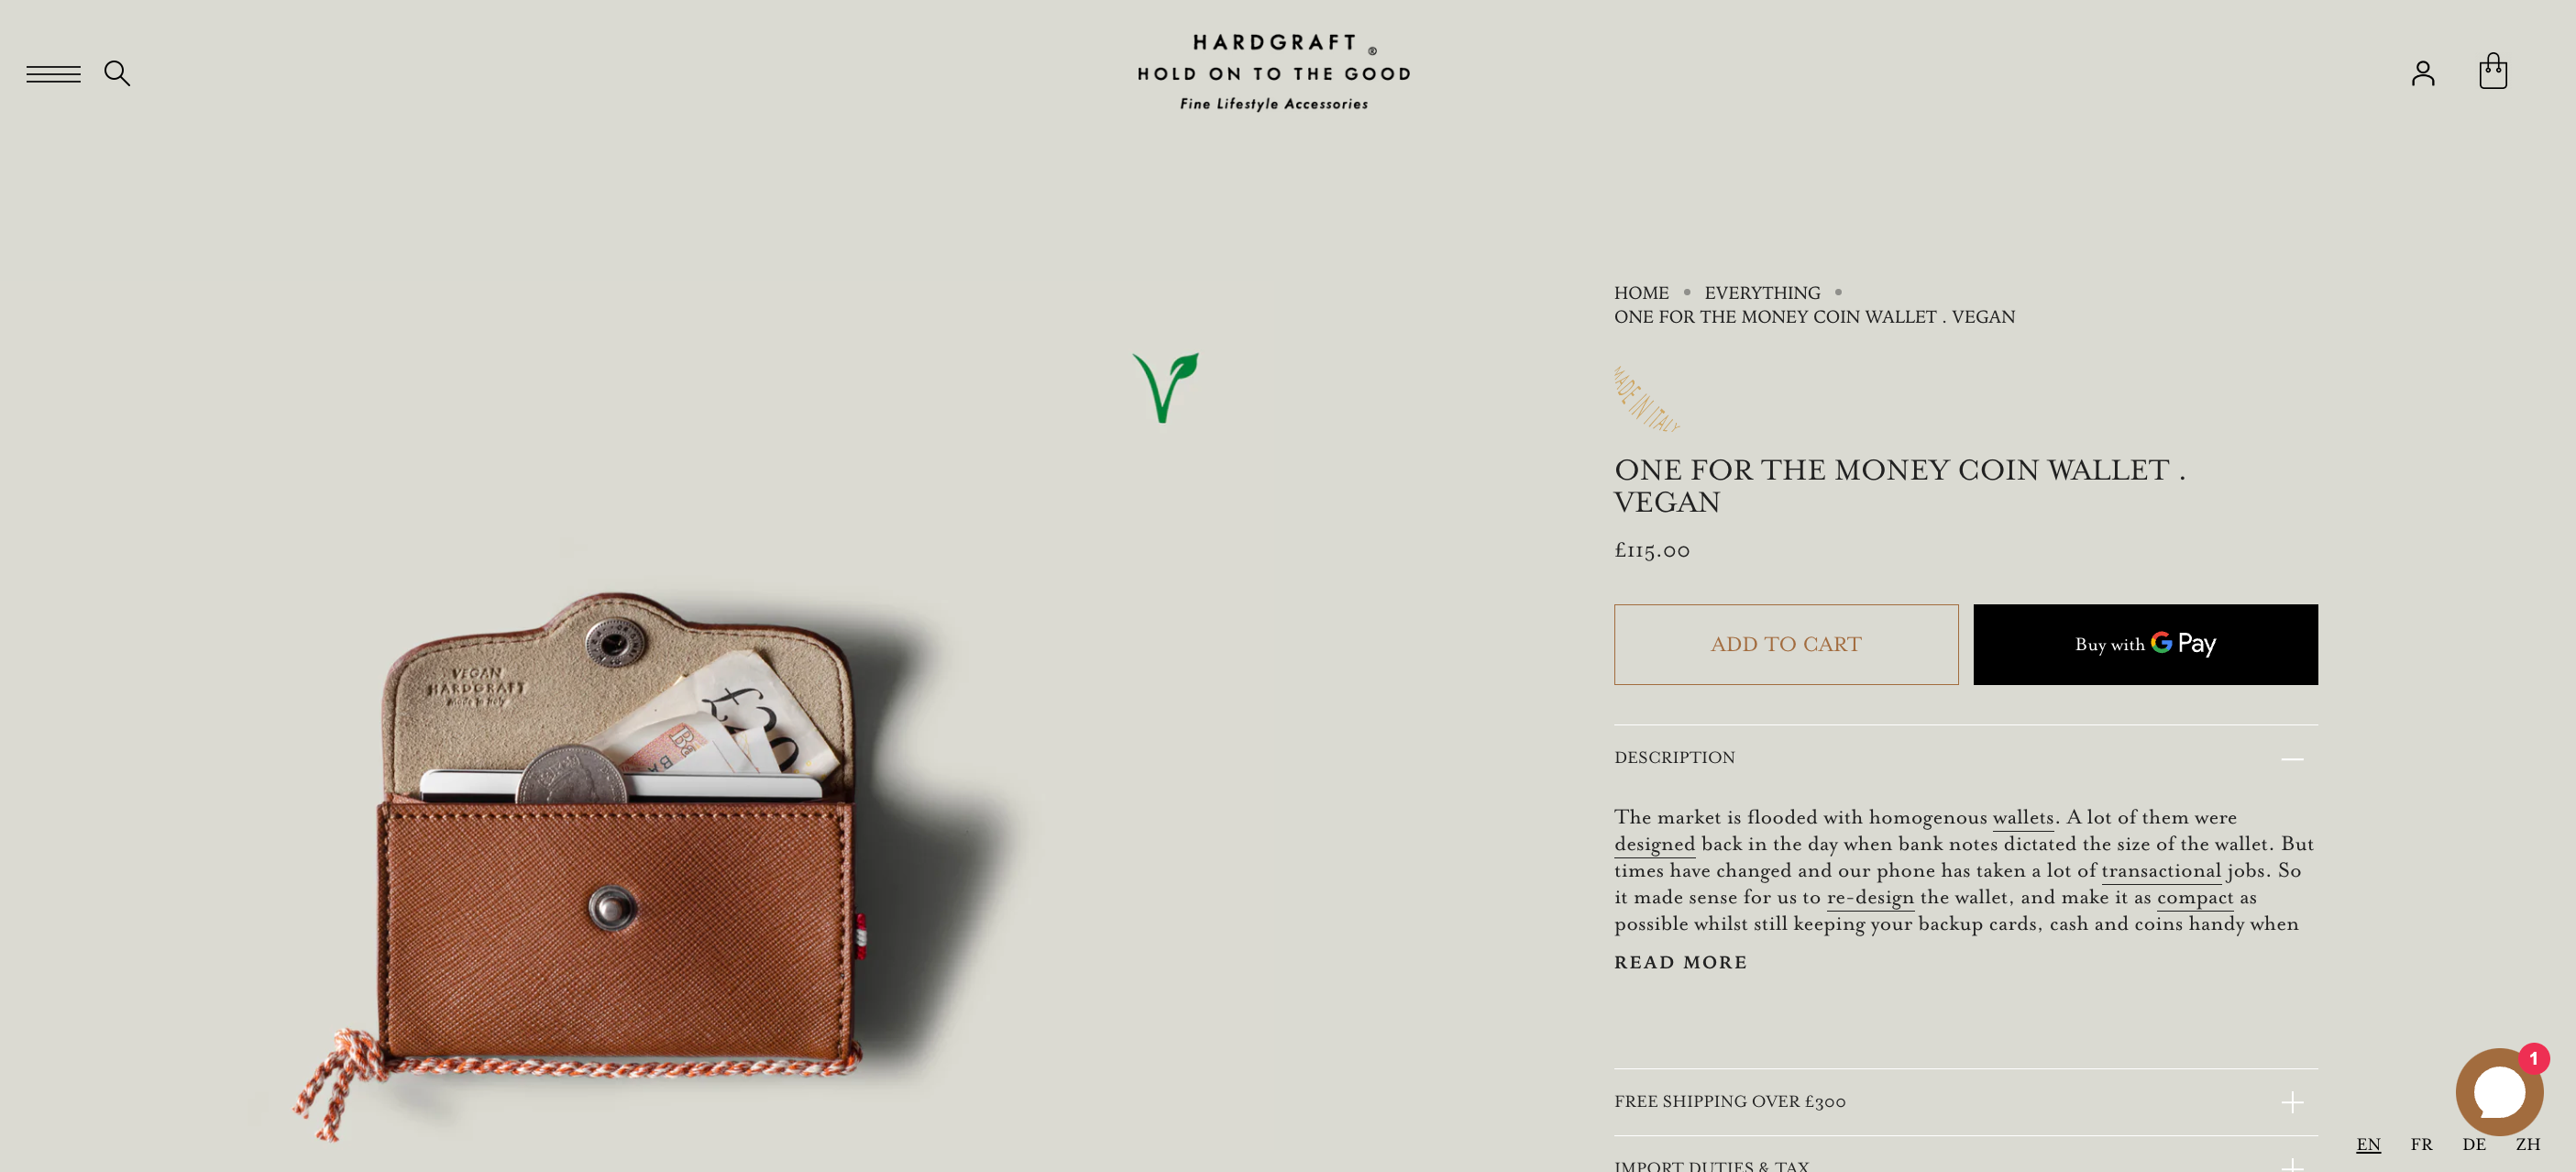 Hardgraft’s website sticks a product’s description to the page as you scroll through images.